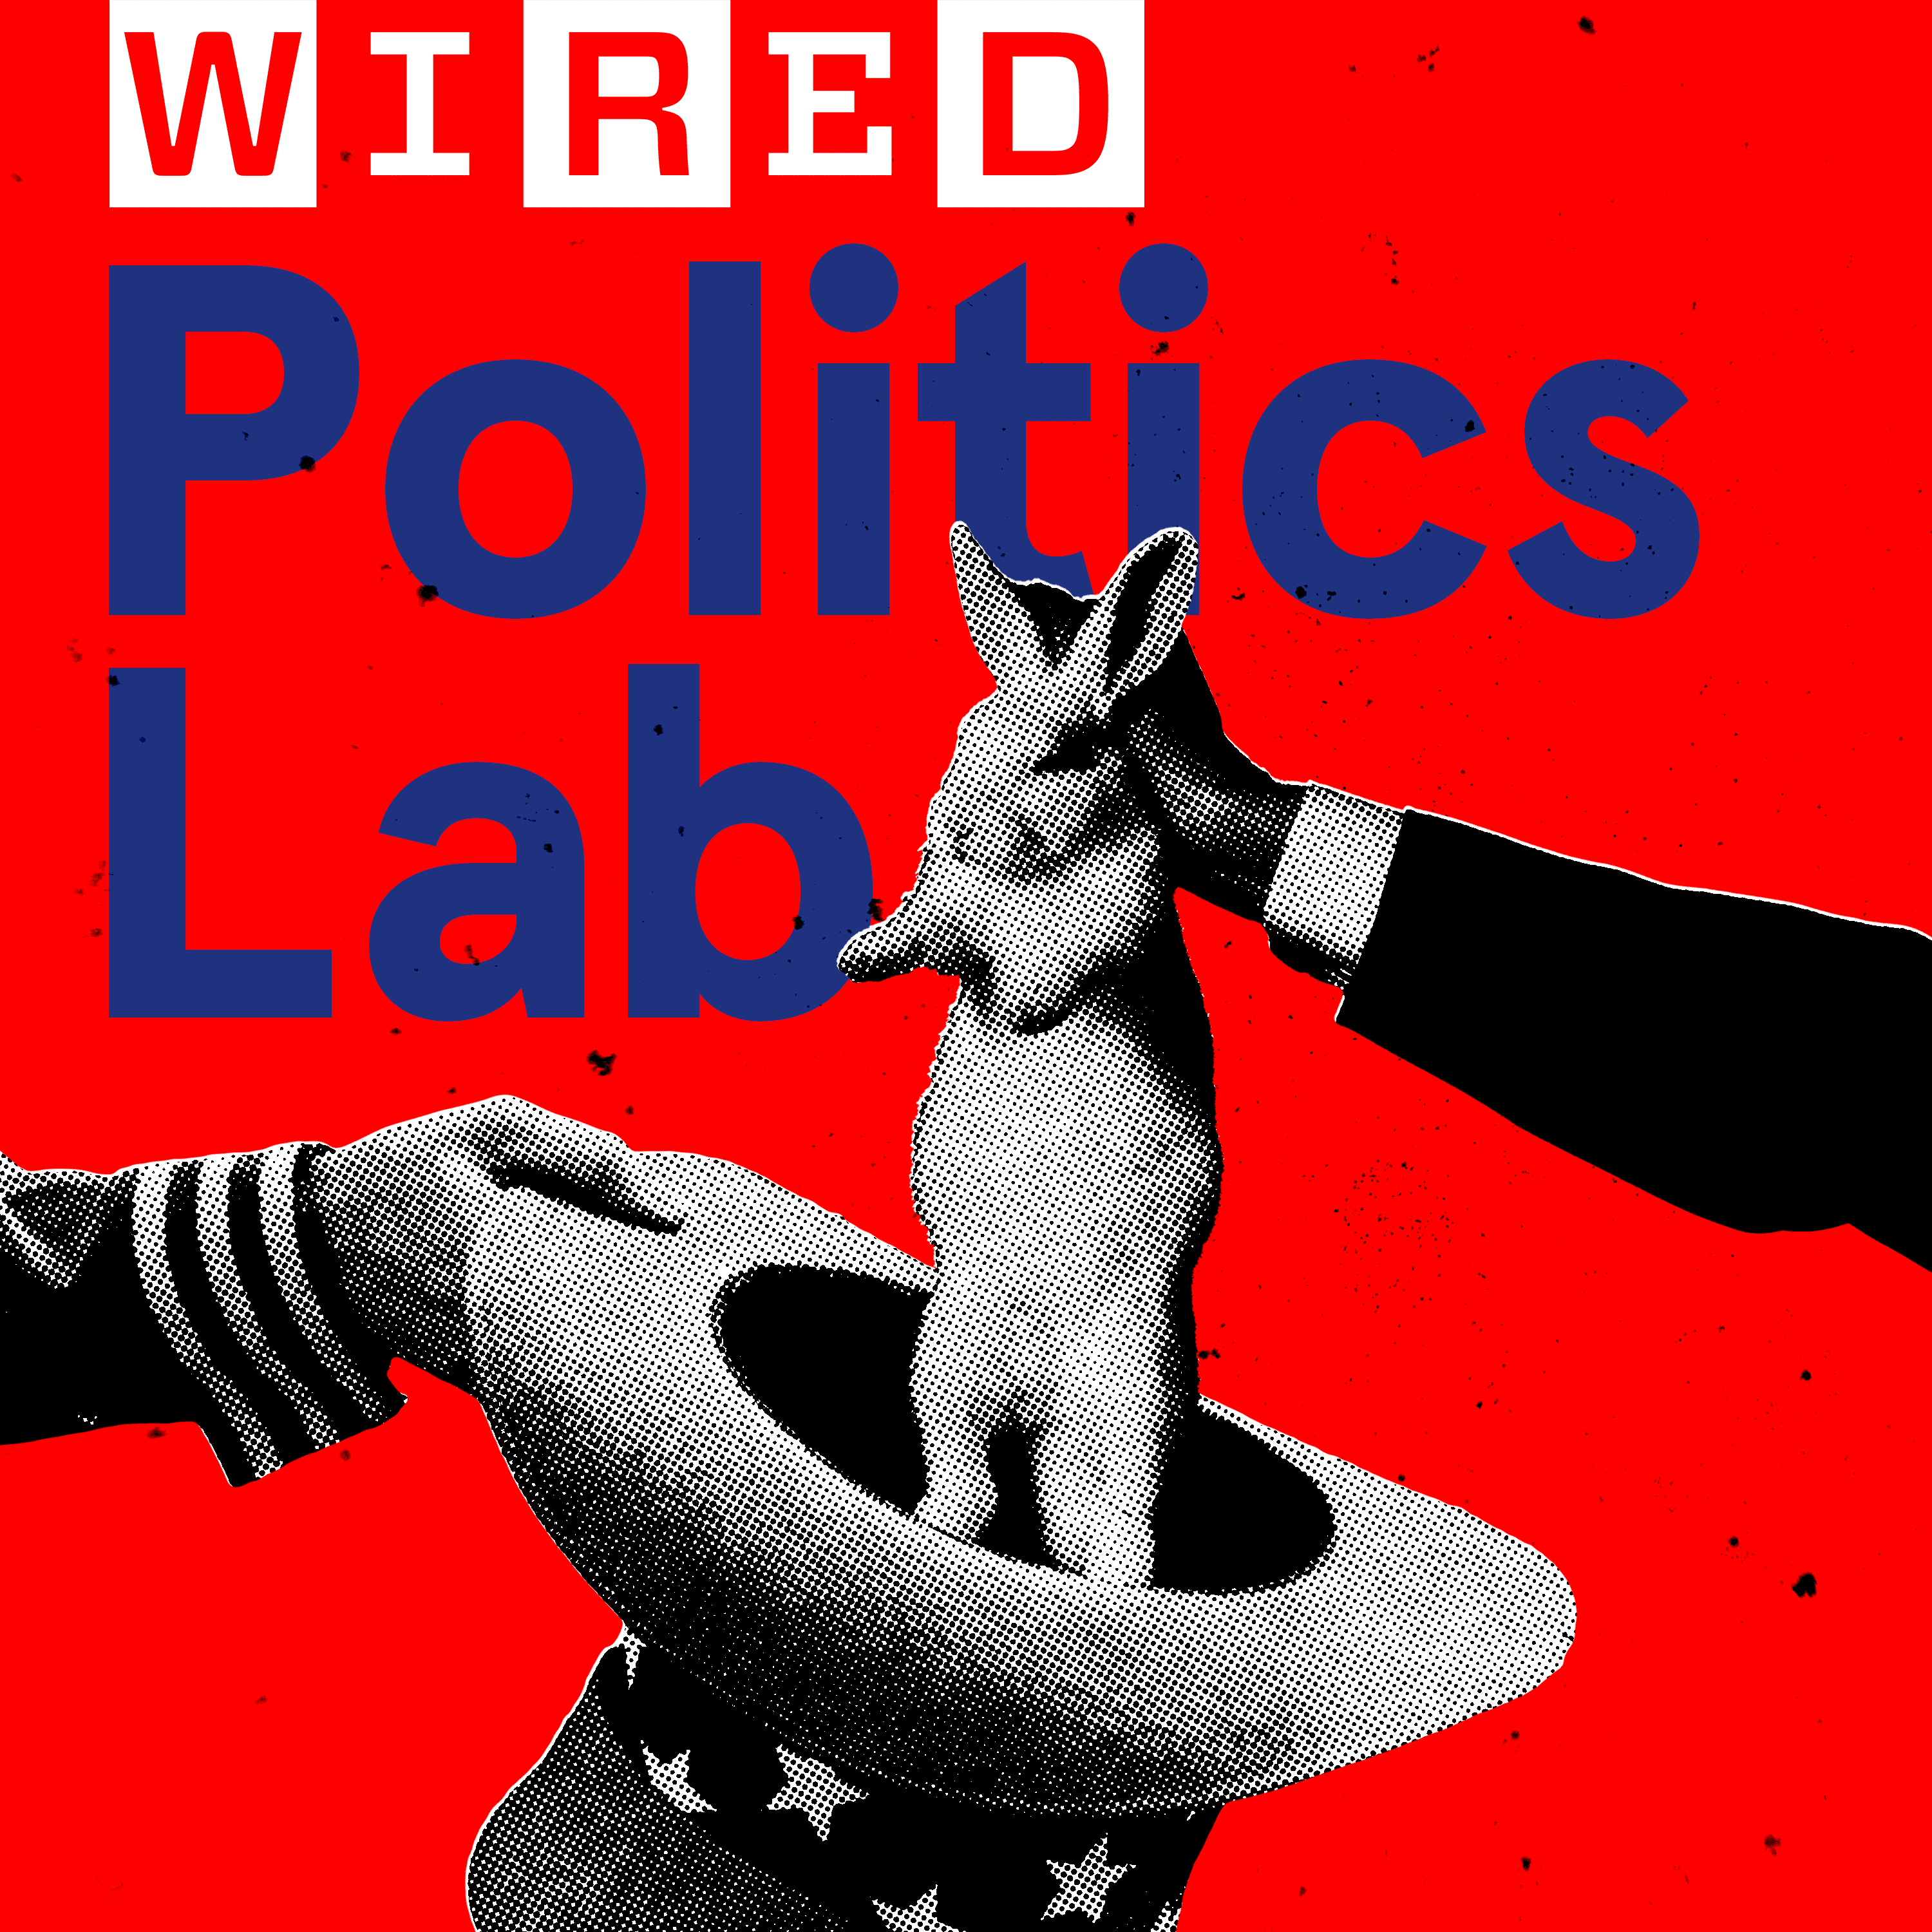 Thumbnail for "WIRED Politics Lab Trailer".